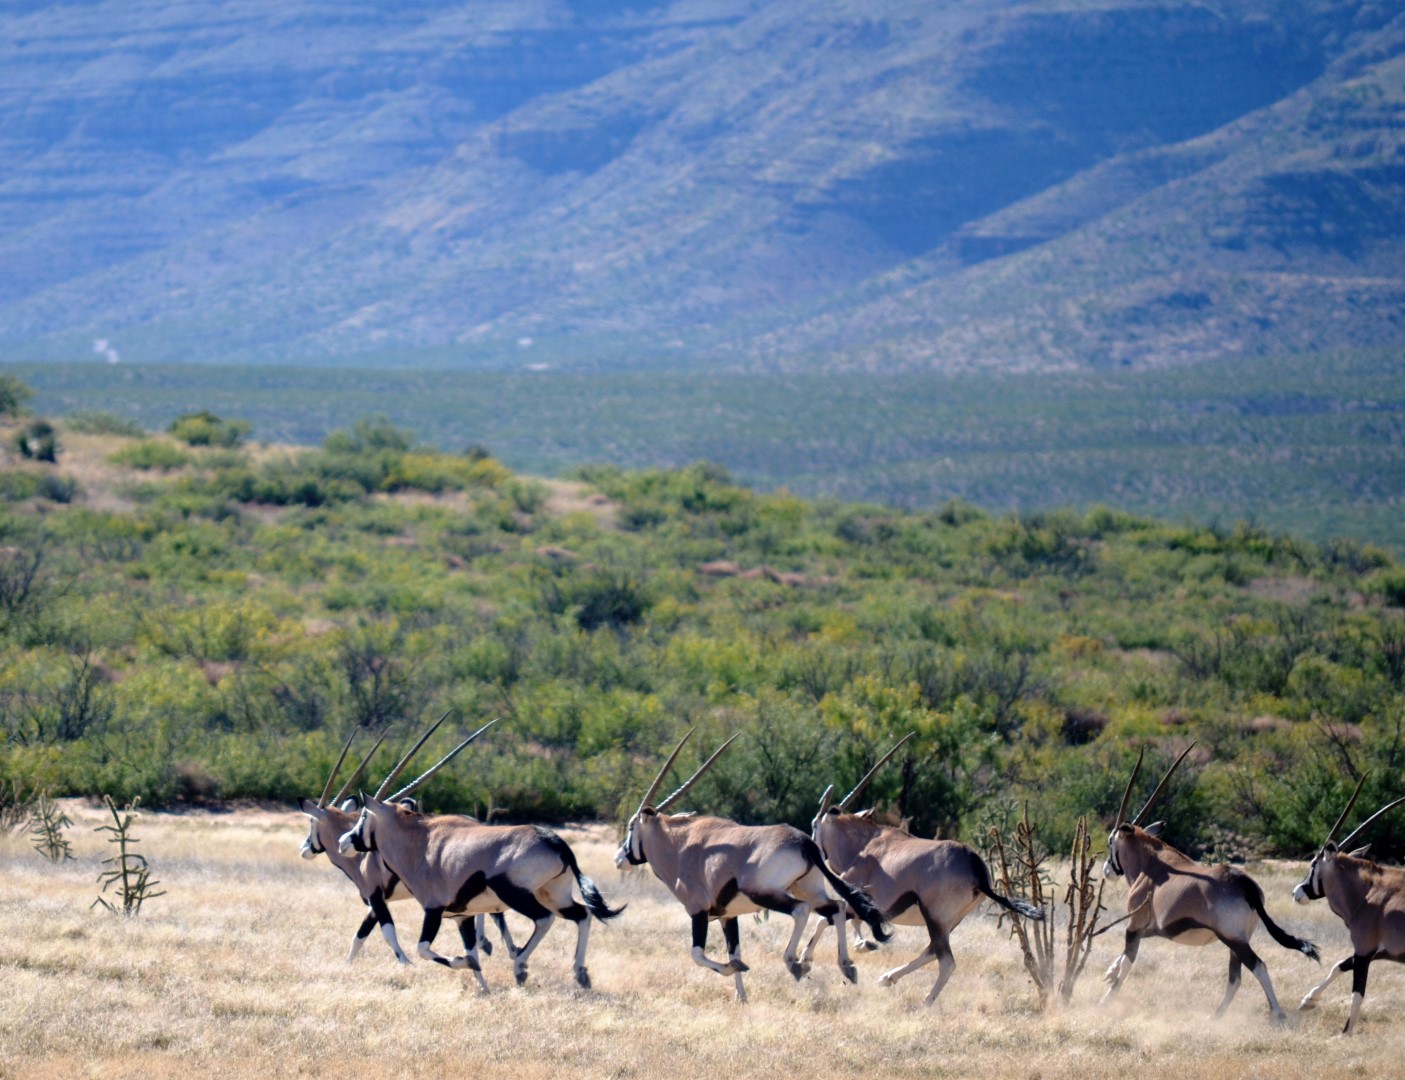 Take a photo safari, visit a bat cave, or hunt on the 362,885-acre Amendaris Ranch with Ted Turner Expeditions. Big game species on the ranch include bison, bighorn sheep, pronghorn, desert mule deer, mountain lion, javelina and oryx, shown here. Photo courtesy Ted Turner Expeditions. 